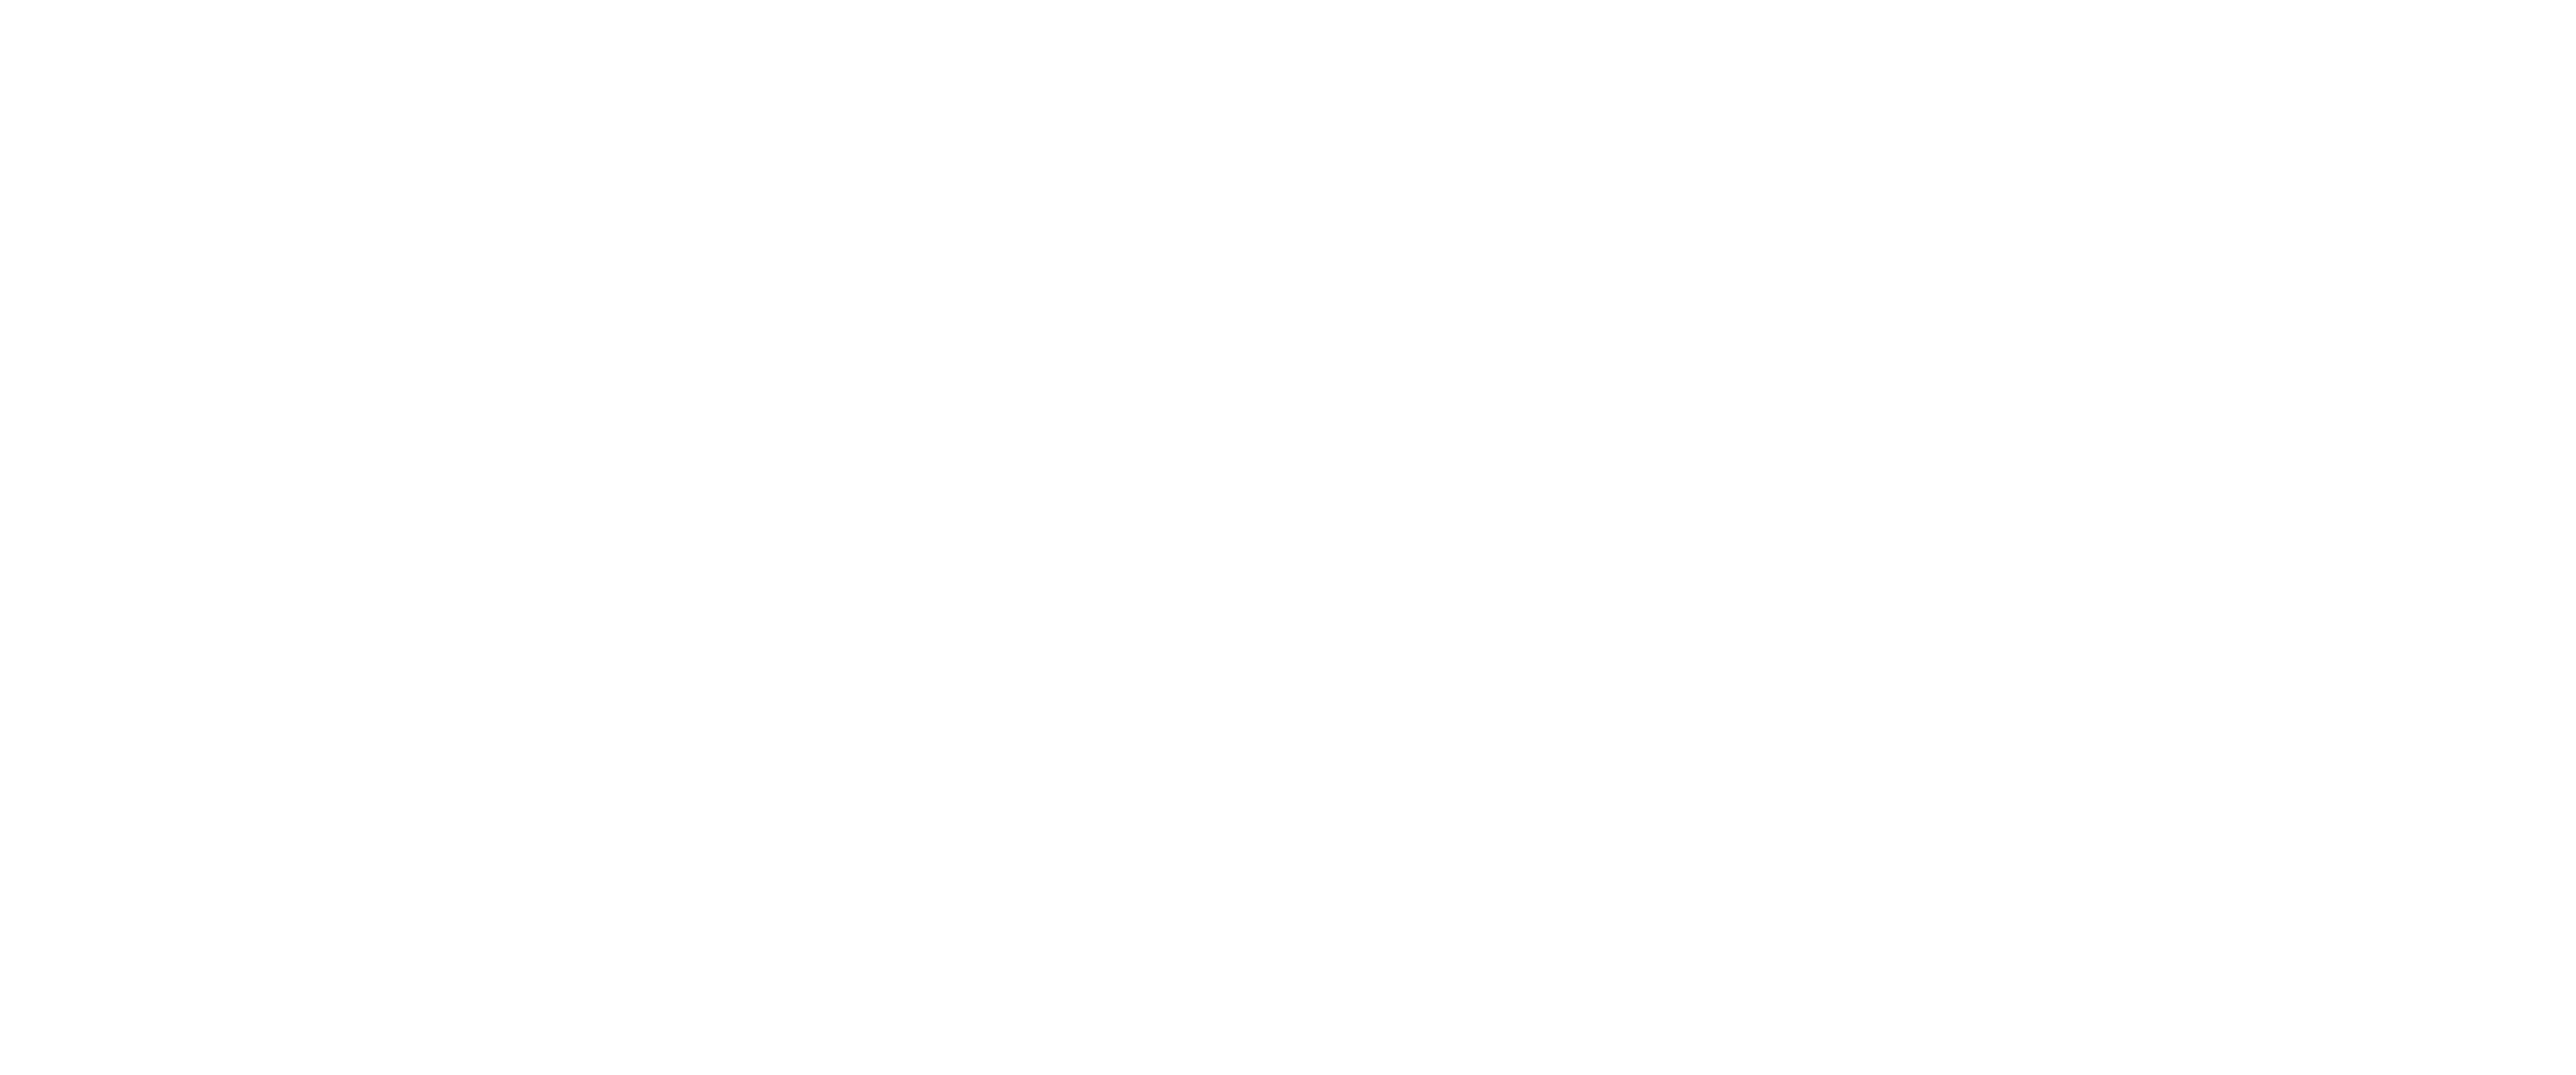 Ornament Lace Style Transparent Png Clip Art Image Gallery Yopriceville High Quality Images And Transparent Png Free Clipart